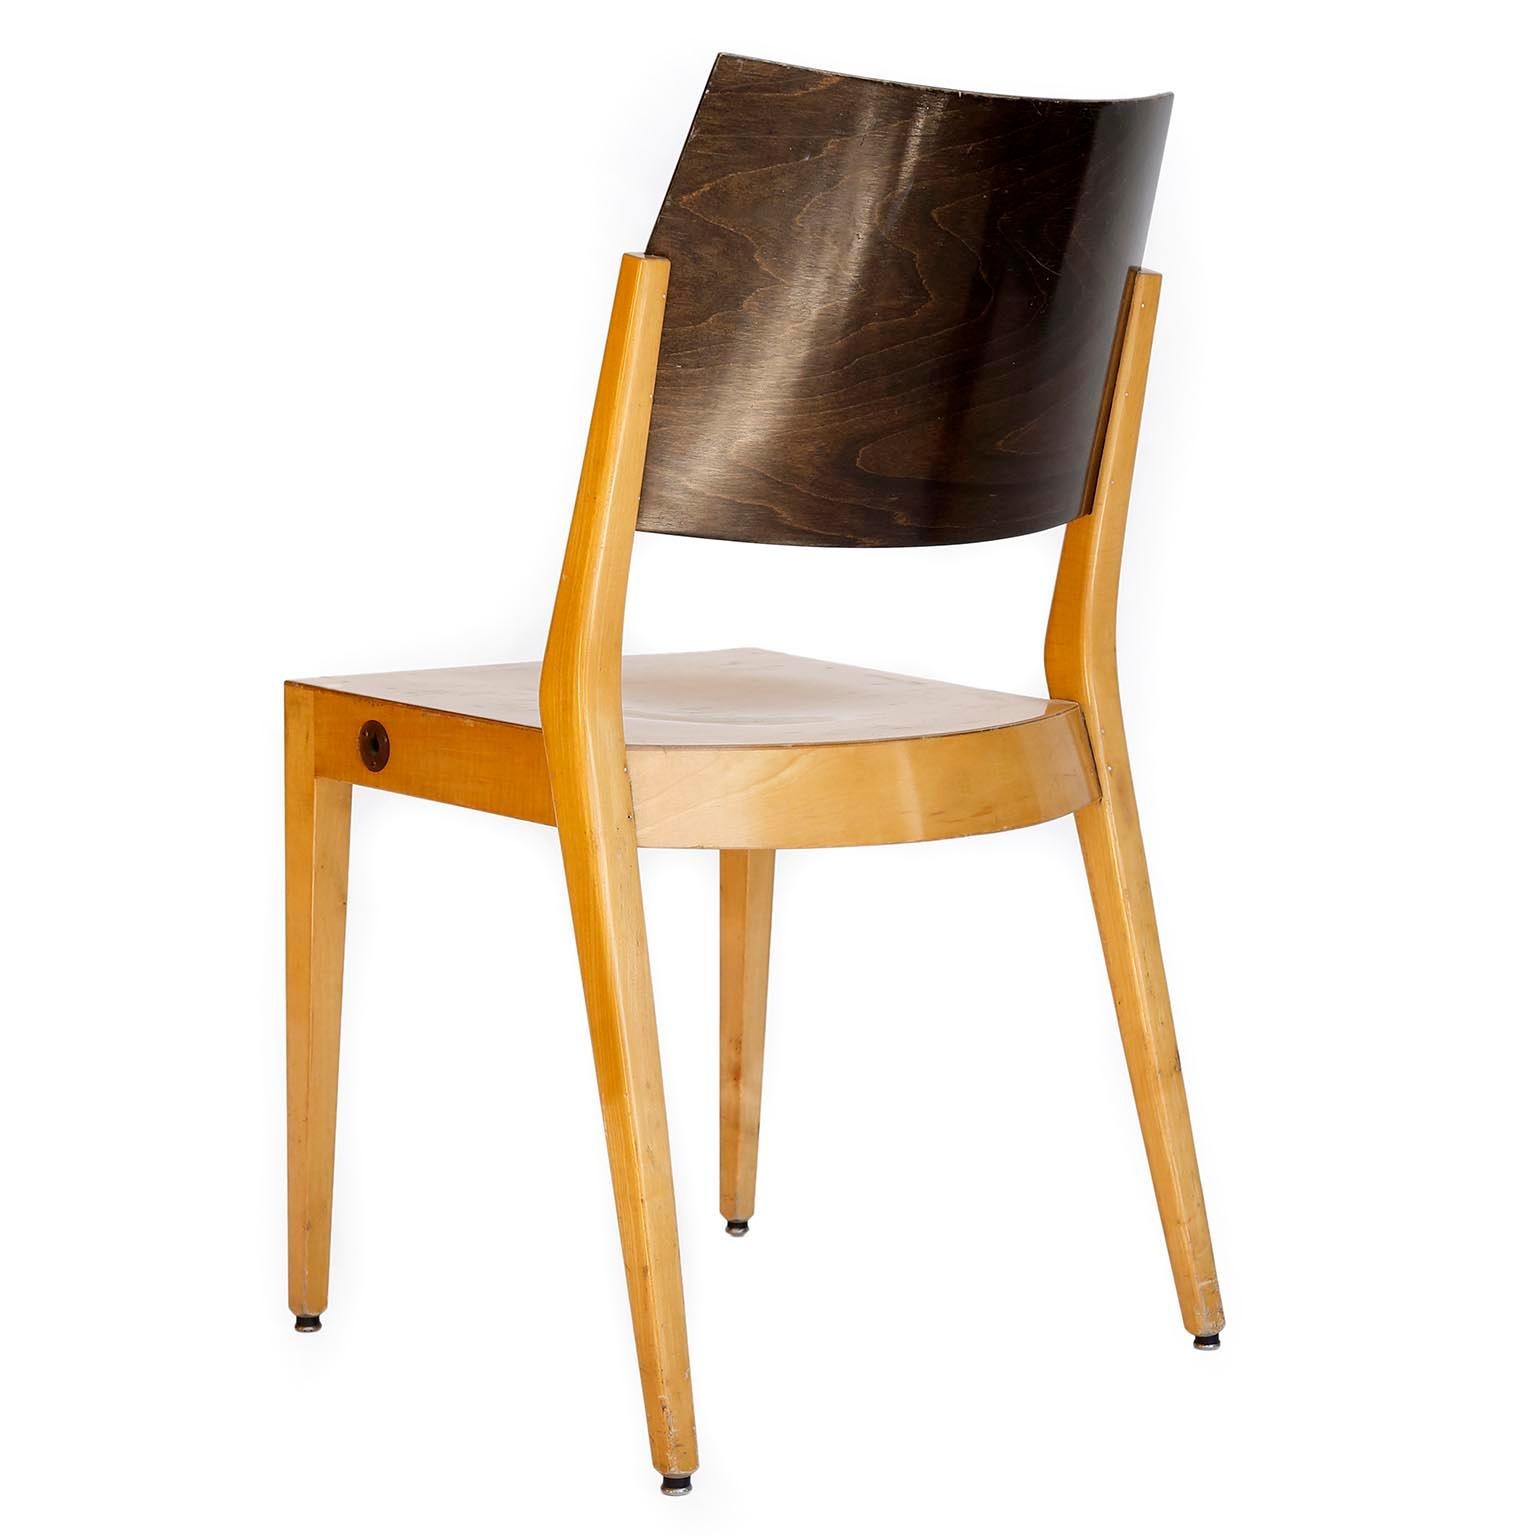 Stained Eight Stacking Chairs by Karl Schwanzer, Thonet, Bicolored Wood, Austria, 1953